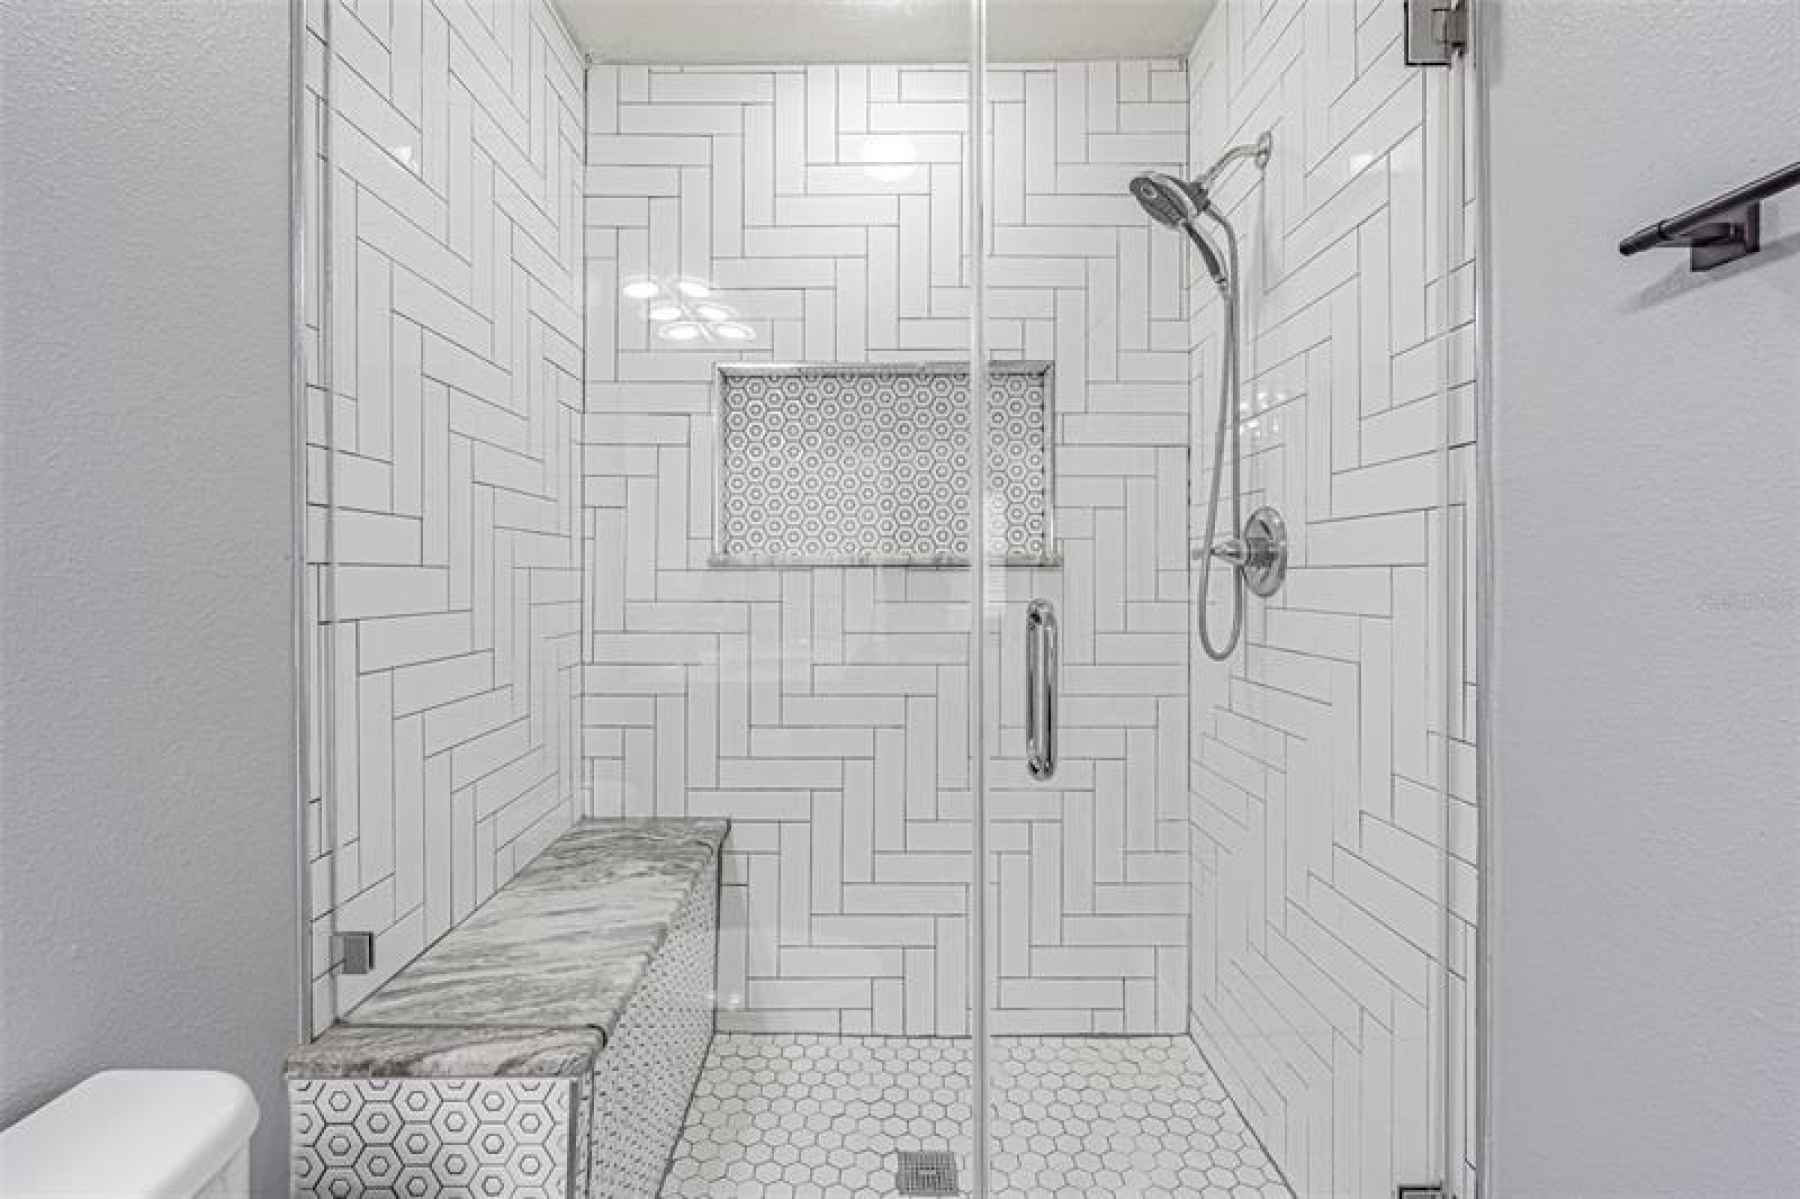 Built in shower bench and updated tiles give the shower a fresh clean look.